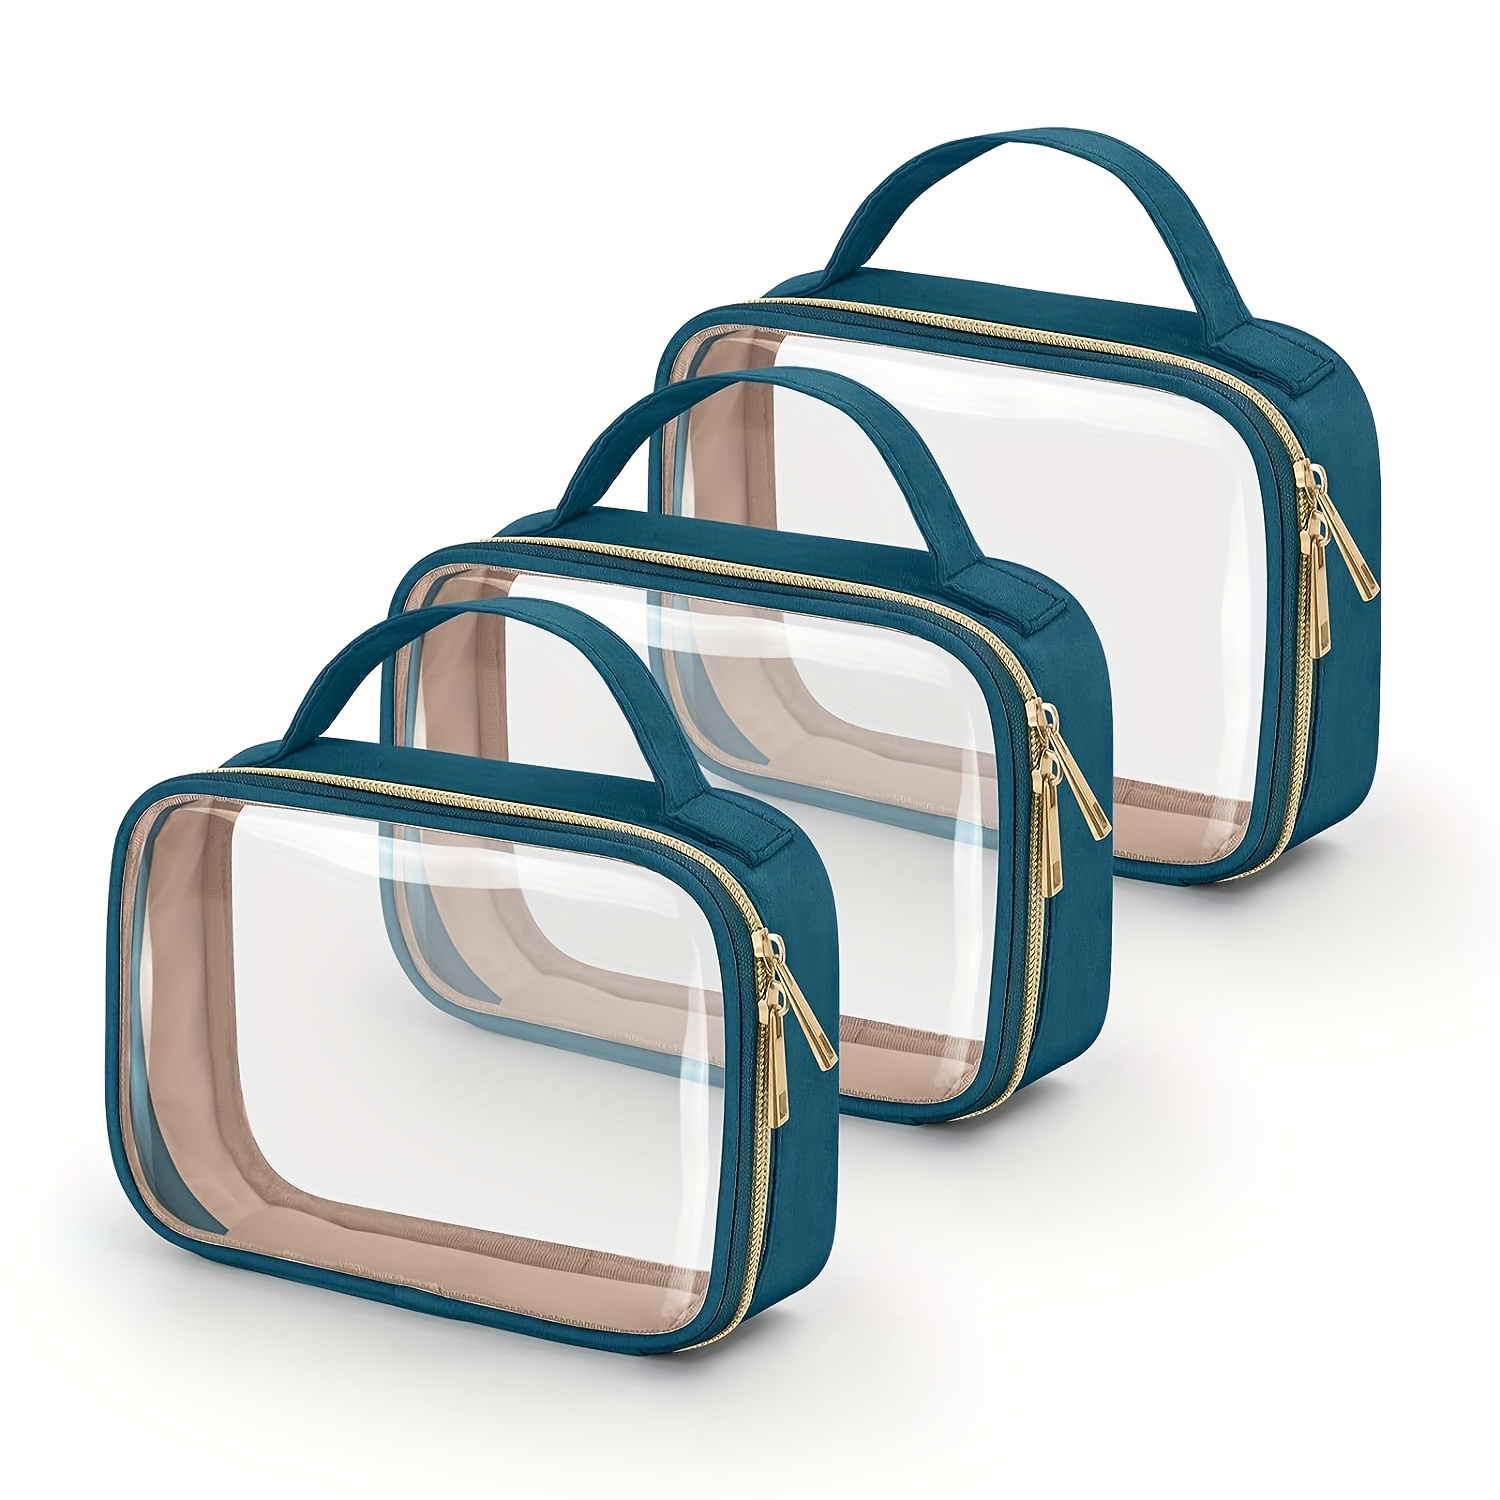  3Pcs Crystal Clear PVC Travel Toiletry Bag Kit for